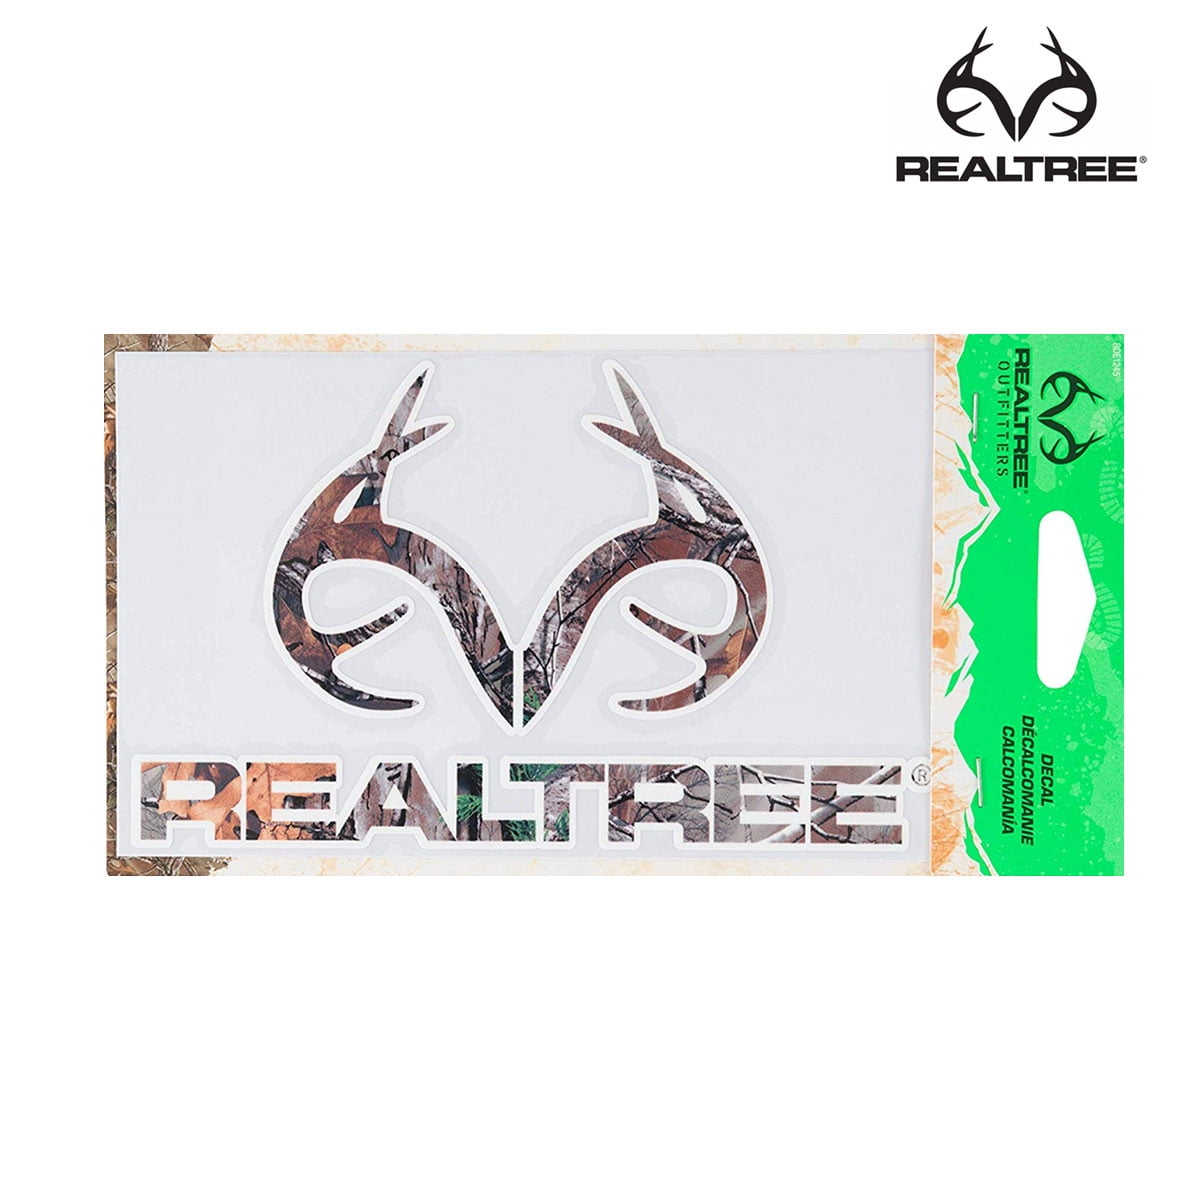 Vinyl Details about   Two Realtree Decals White 